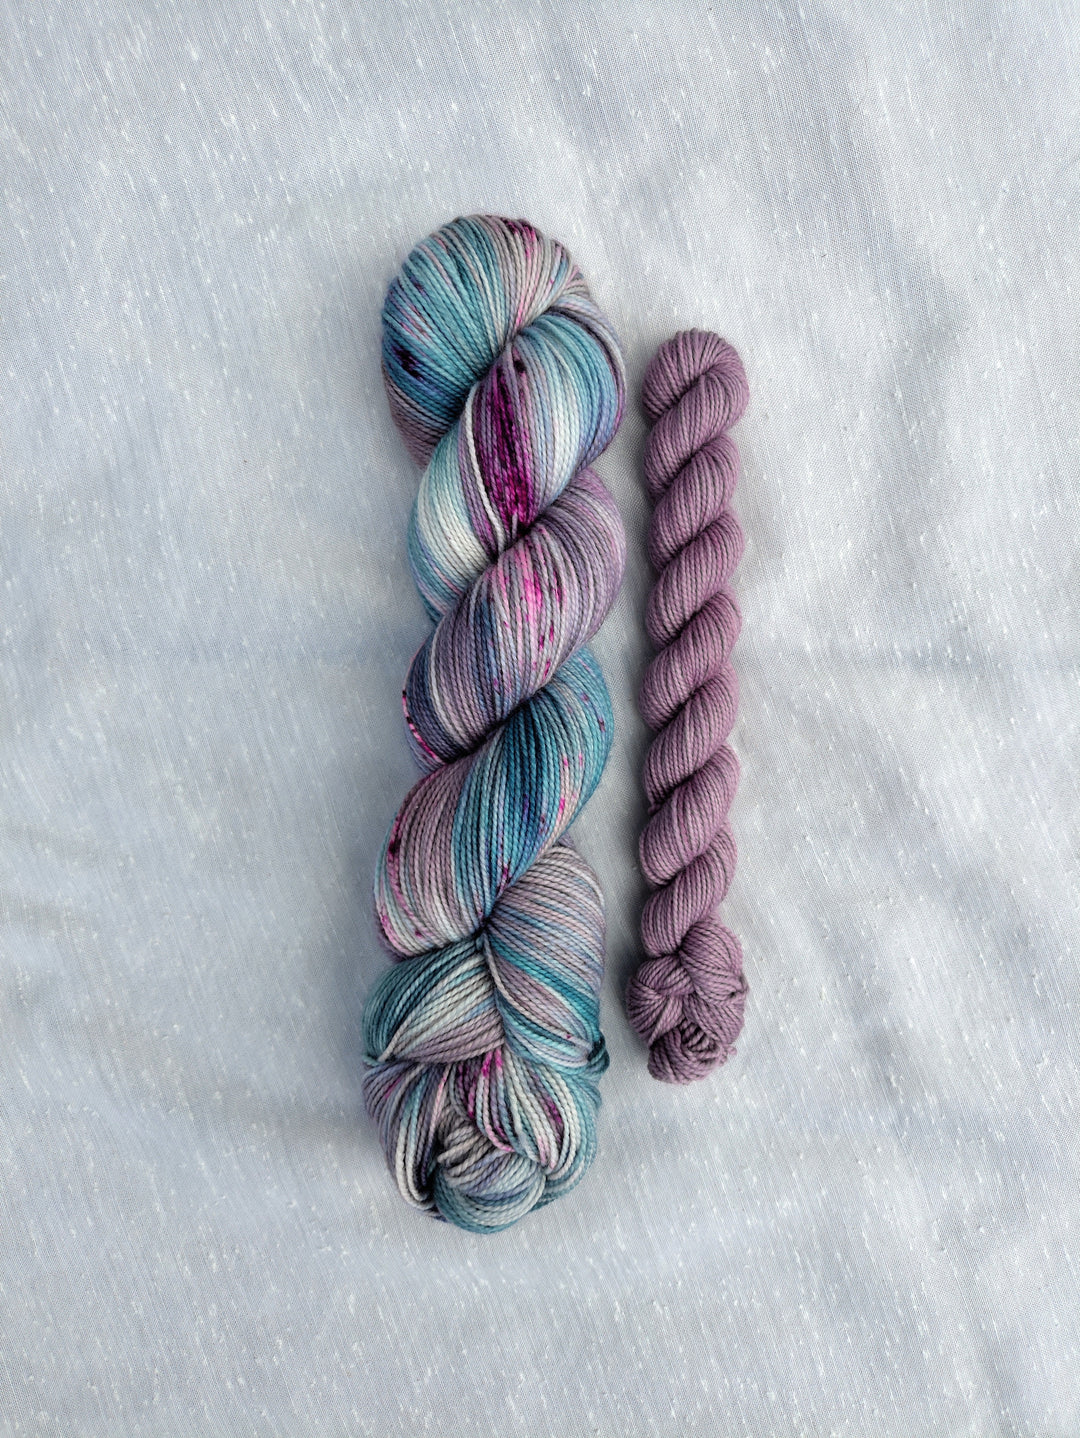  A full skein of blue, purple and green speckled yarn and a mini skein of pale purple semisolid yarn.